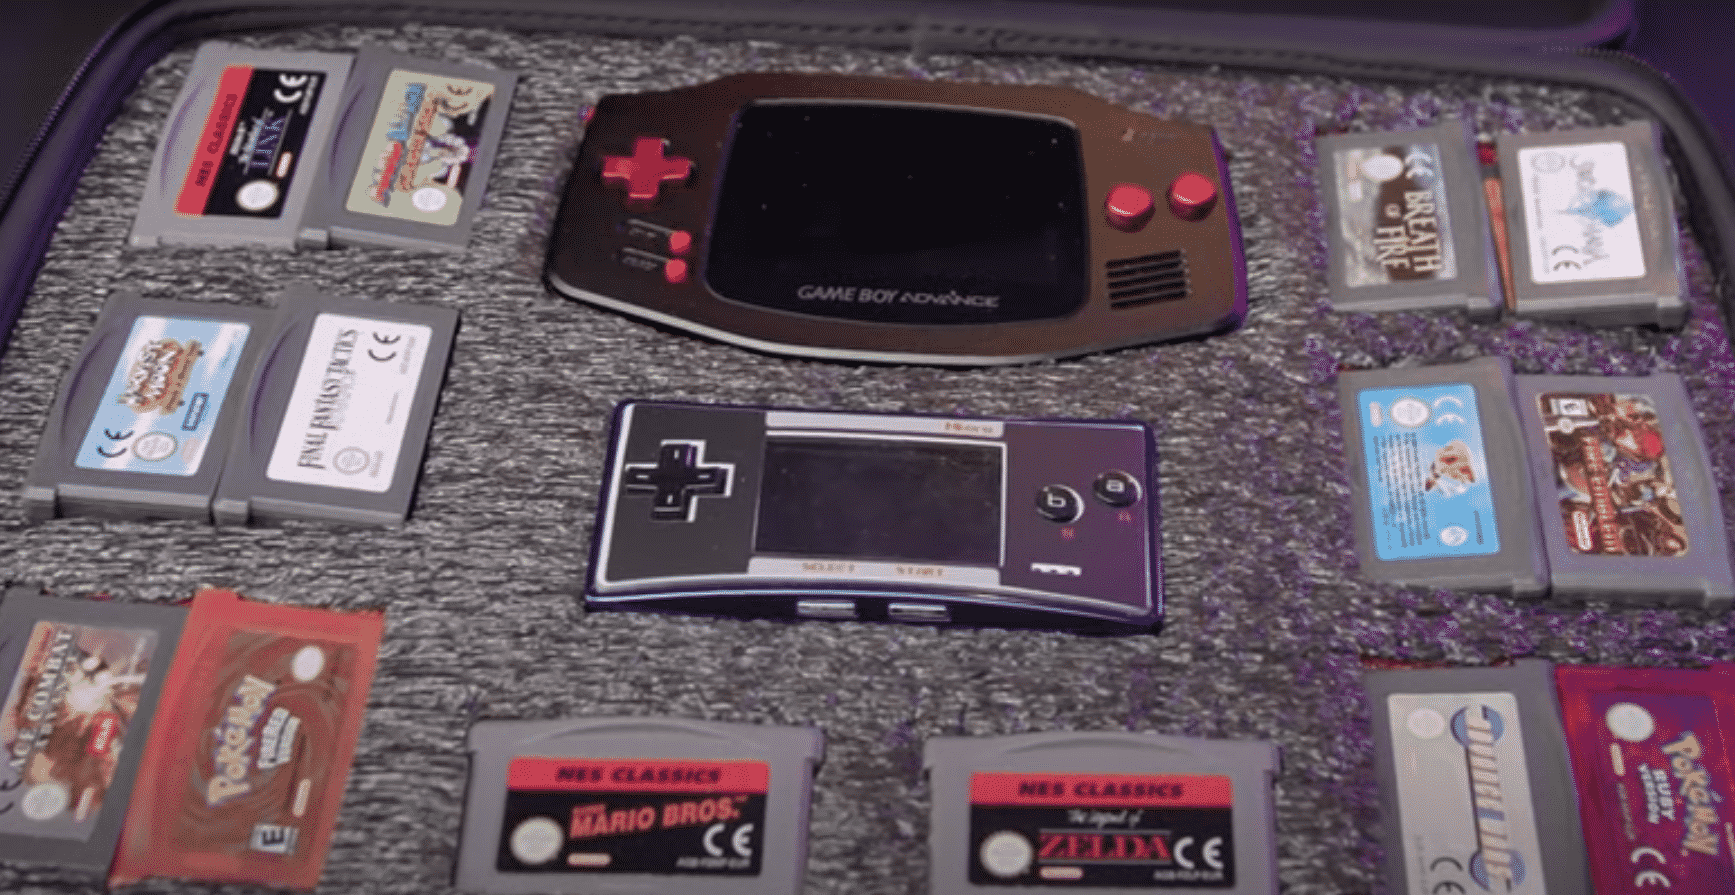 taking portable gaming to a whole new level with a portable Game Boy Advance case and games